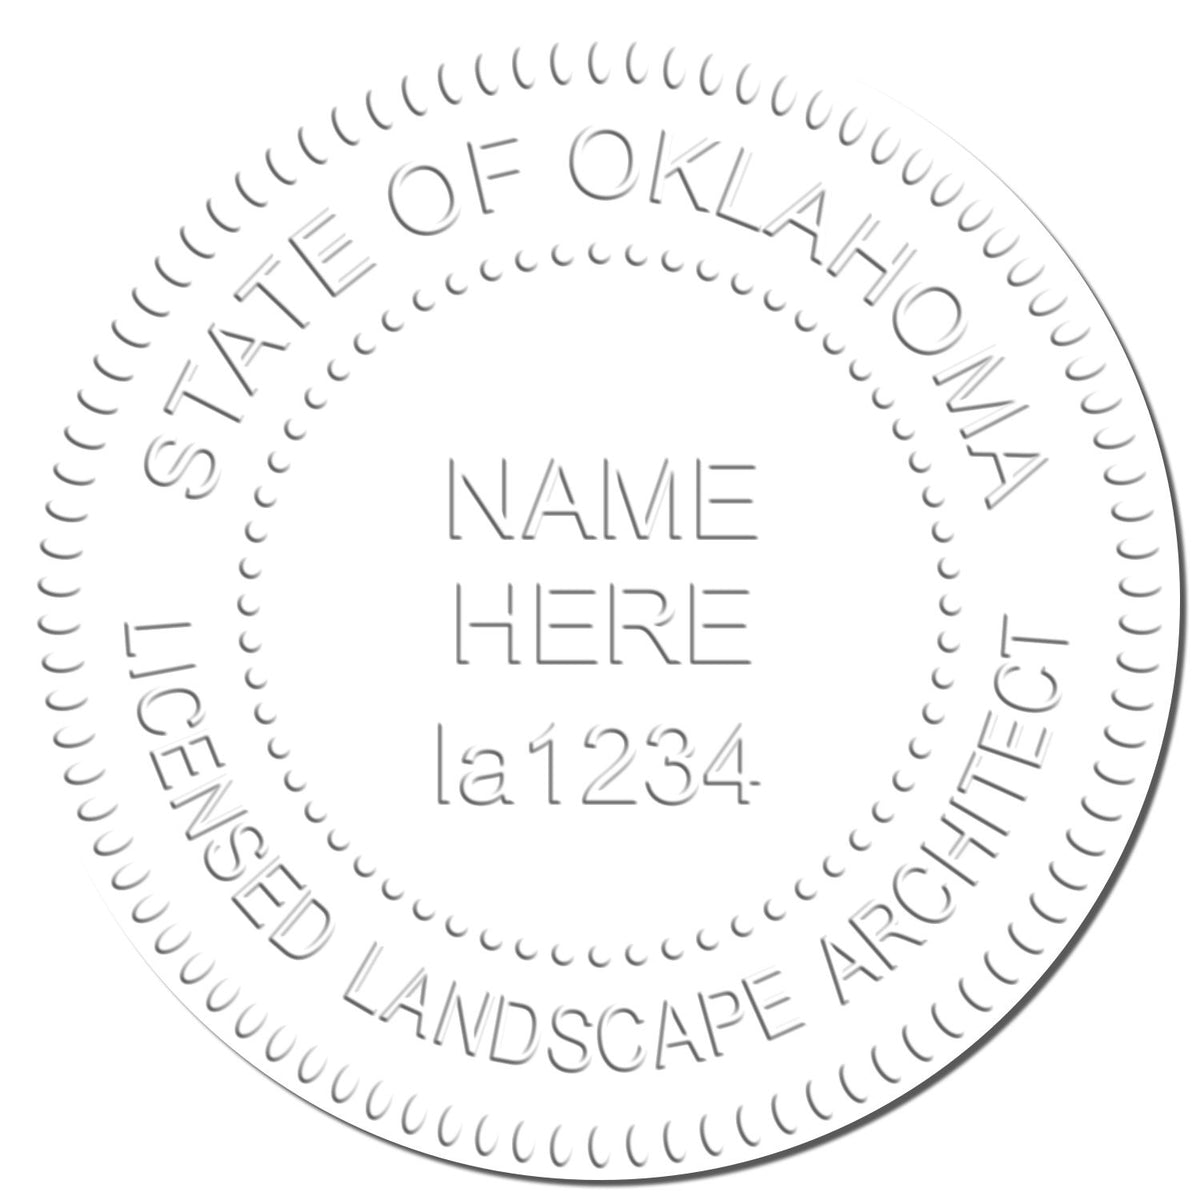 This paper is stamped with a sample imprint of the Gift Oklahoma Landscape Architect Seal, signifying its quality and reliability.